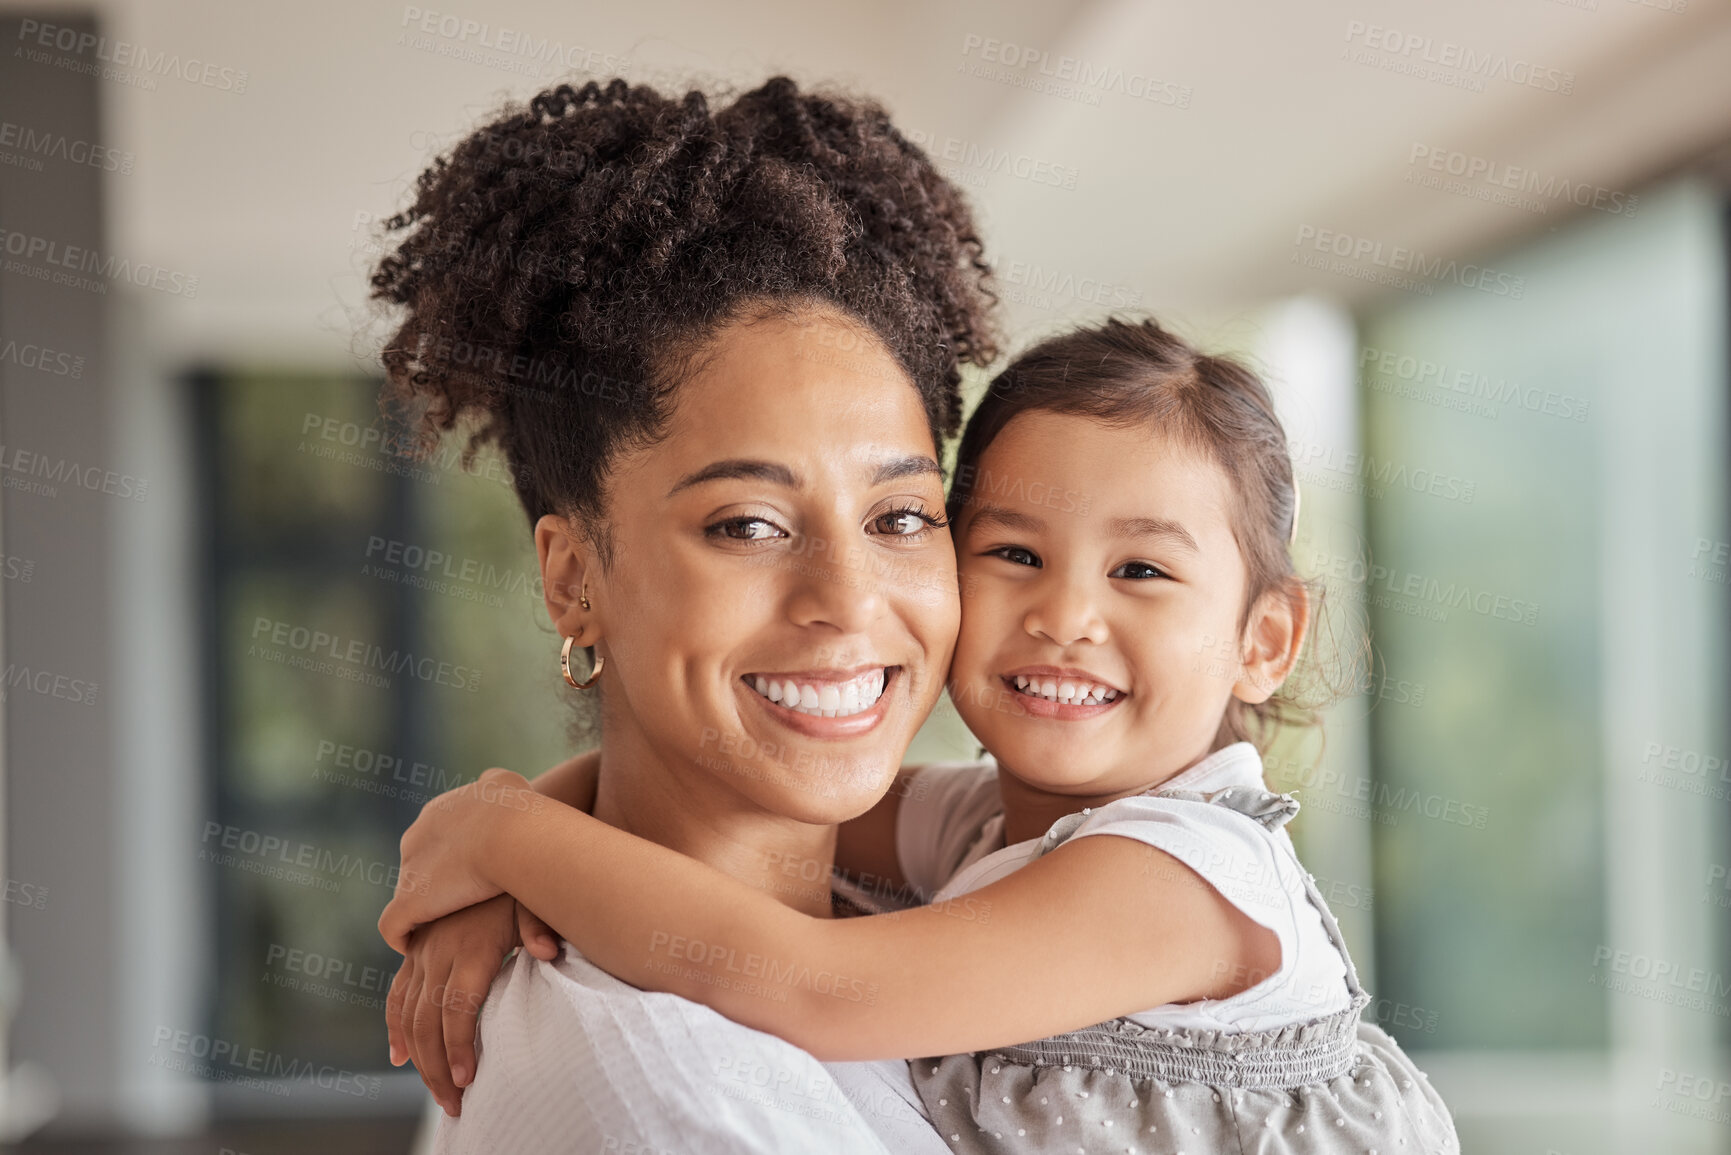 Buy stock photo Family, love and bond of mother and daughter sharing a hug, happiness and having fun on mothers day in their puerto rico home. Portrait and smile of woman and foster girl child bonding after adoption